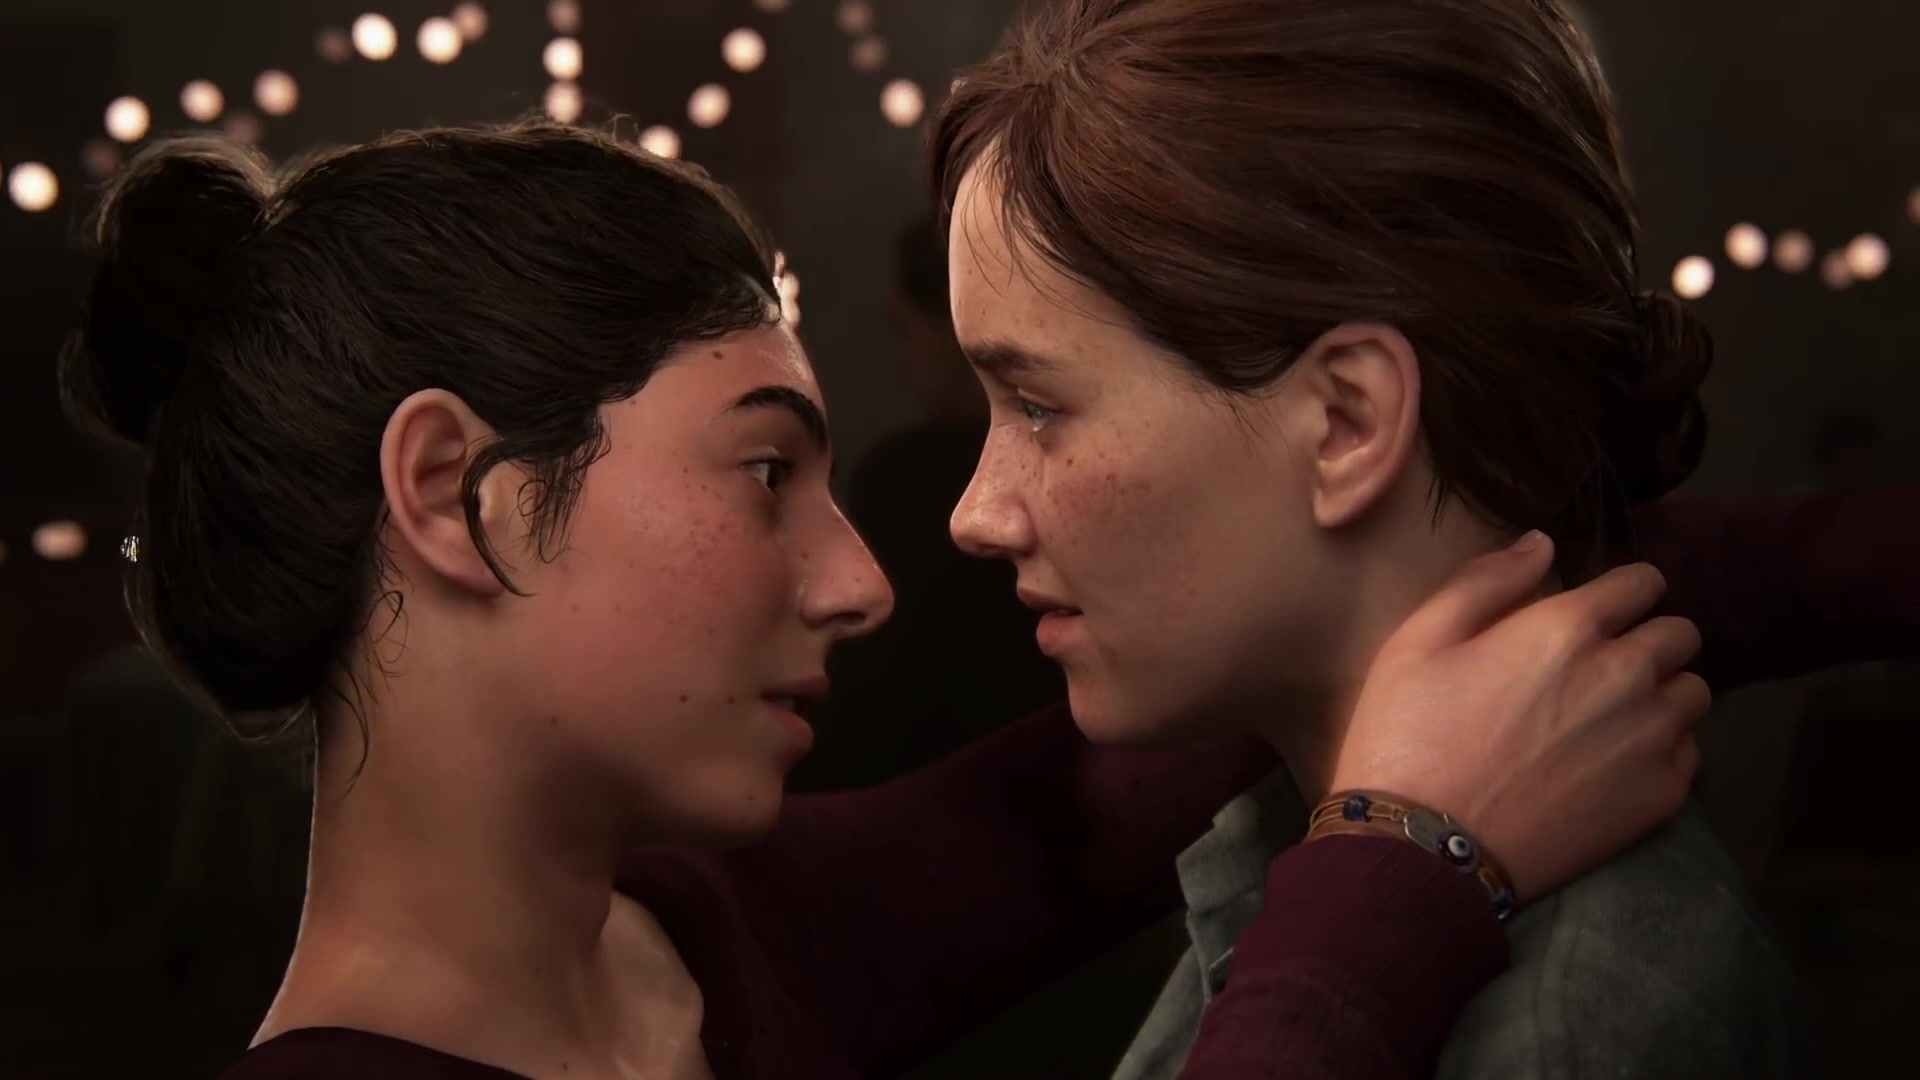 Two Girls Kissing Is Not Ruining Games Patch Notes Words About Games